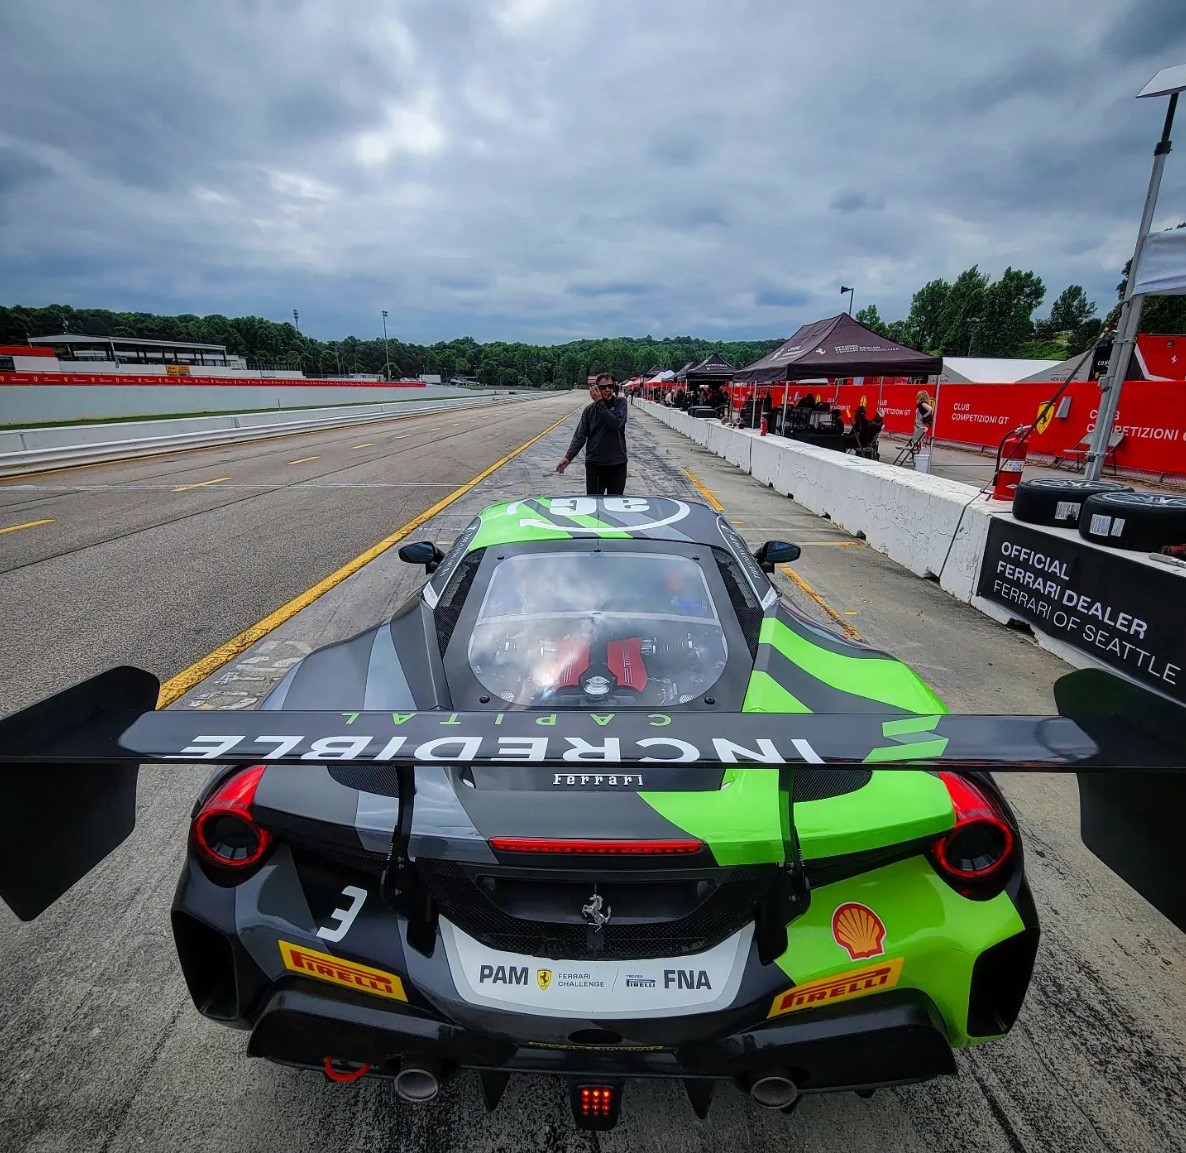 The gates are open for Ferrari Challenge! Practice today and then there's racing on Saturday and Sunday. Come join us! Buy tickets here: roadatlanta.com/ferrari-challe…

📷: @marcmillershow 

#MichelinRaceway / #RoadAtlanta / @ferrariraces